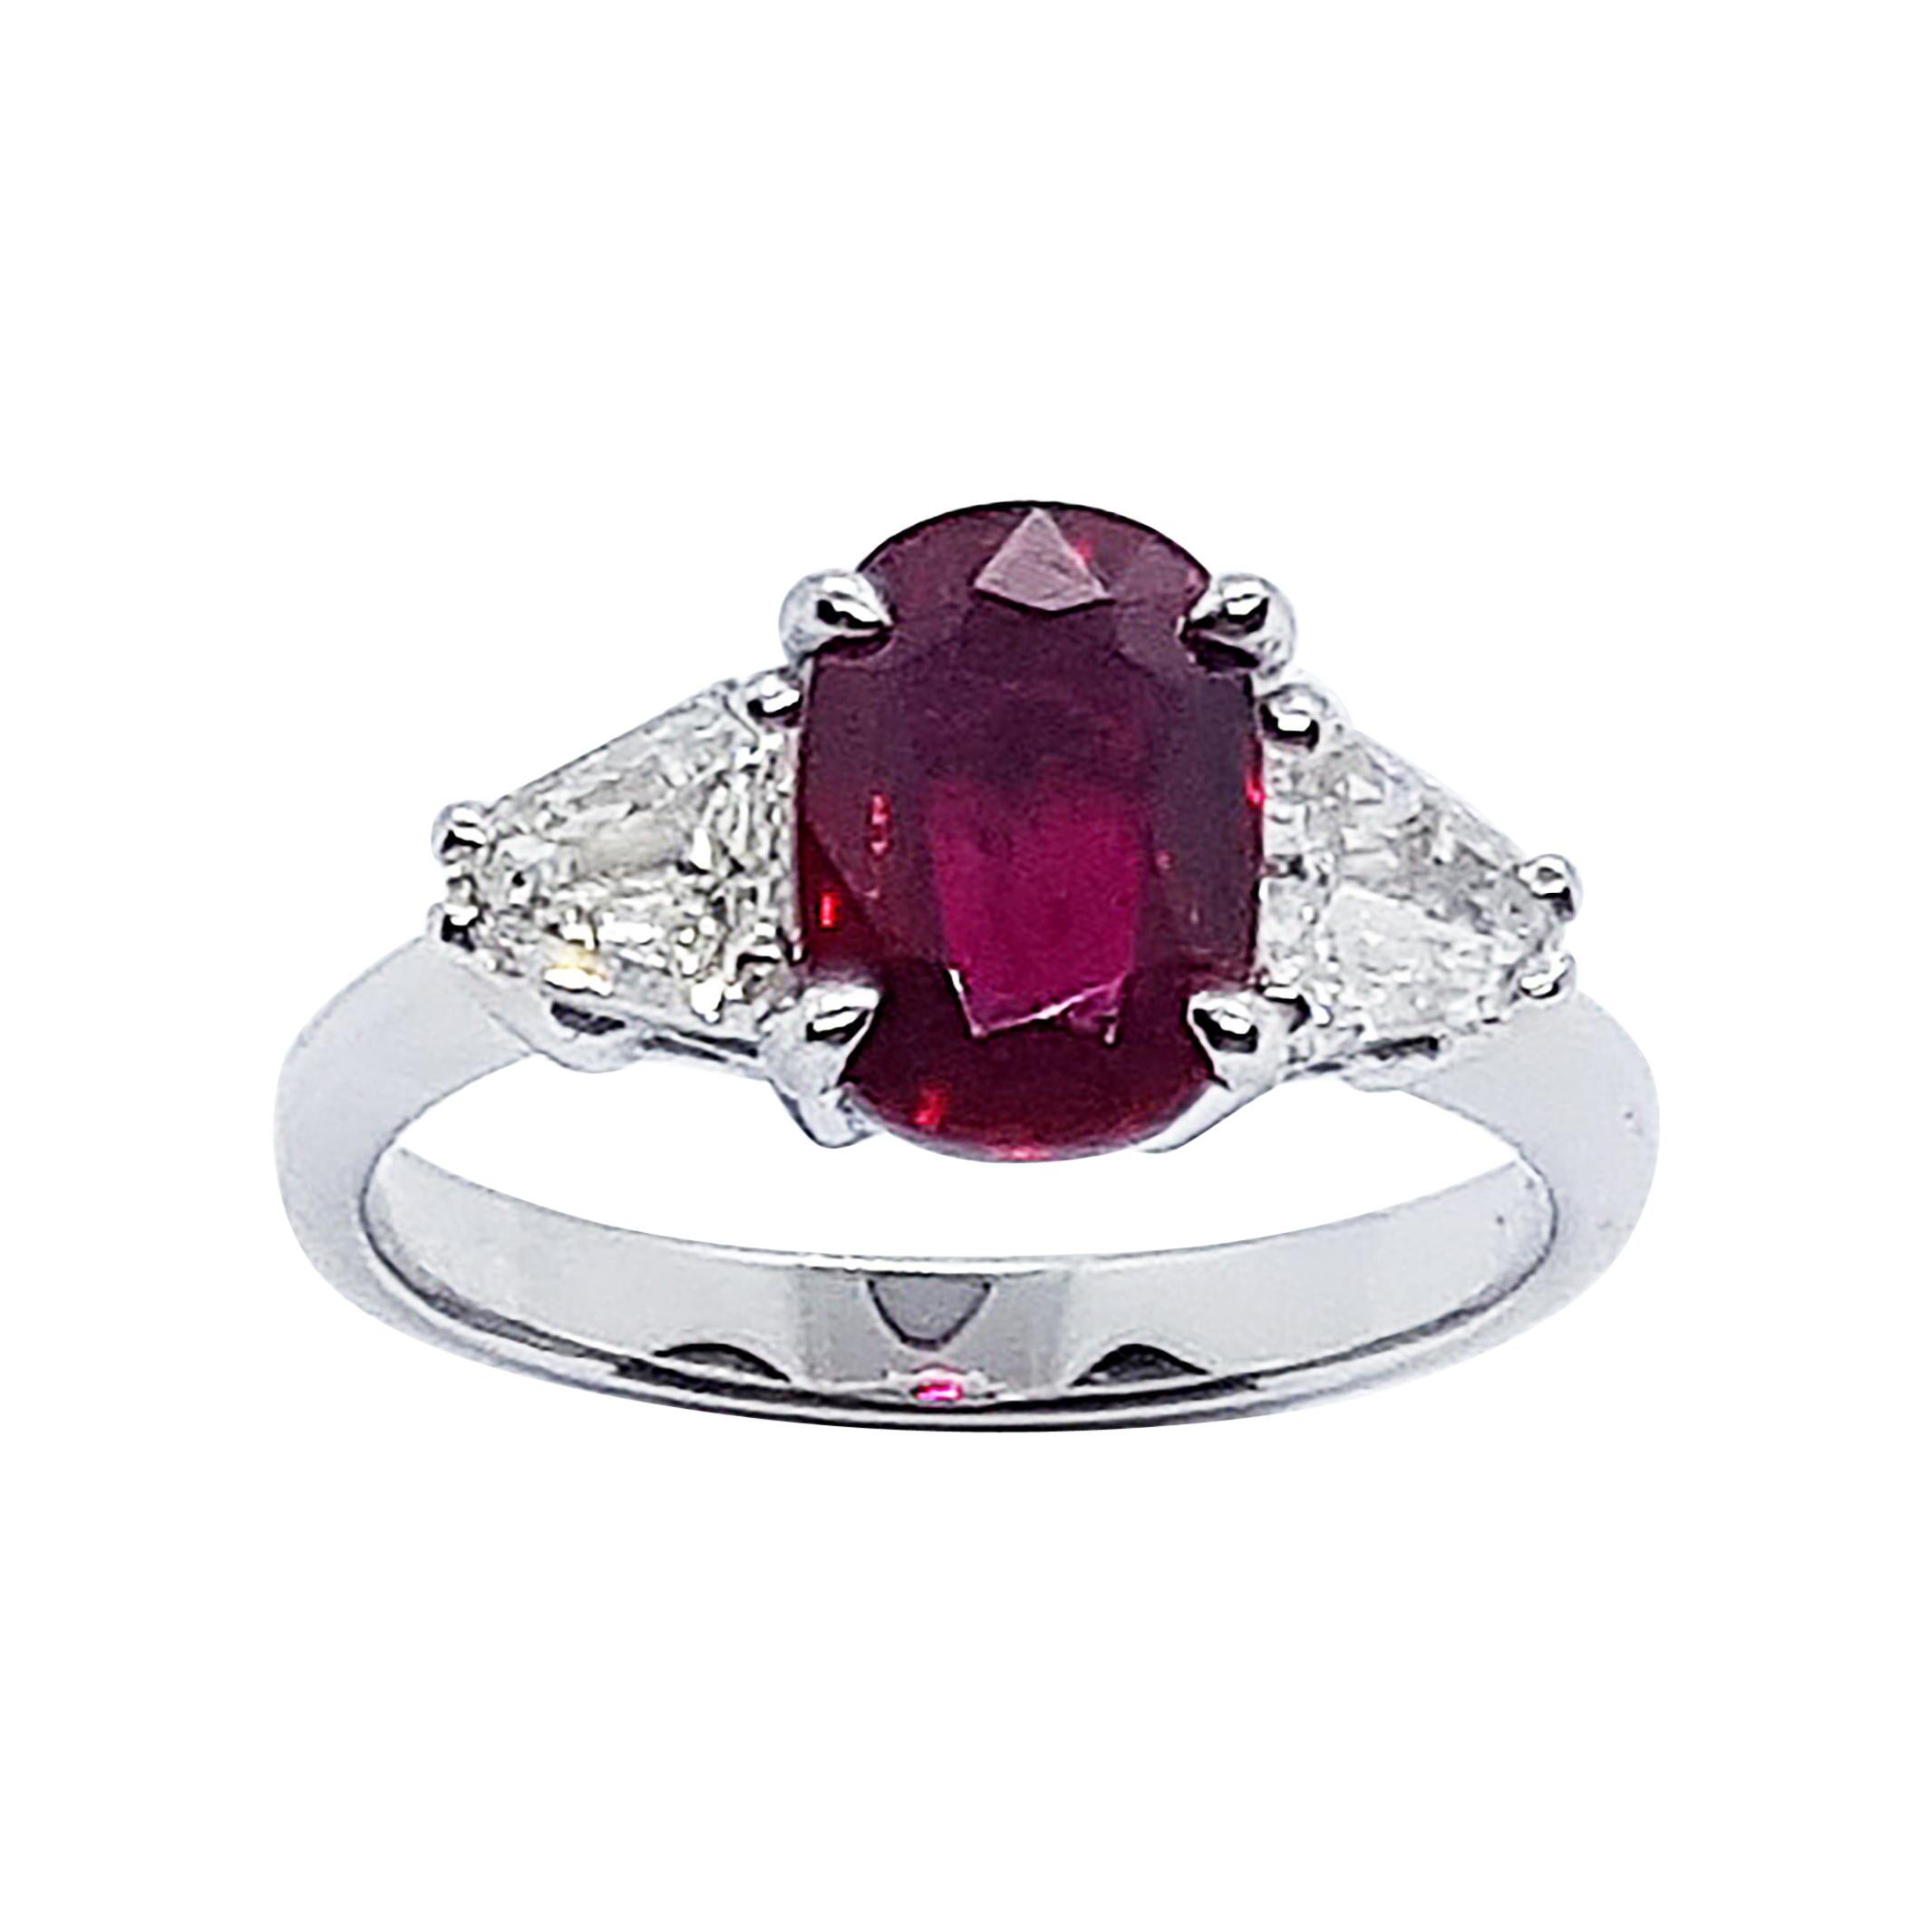 GIA Certified Unheated 1.56 Cts Ruby with Diamond Ring in 18 Karat White Gold For Sale